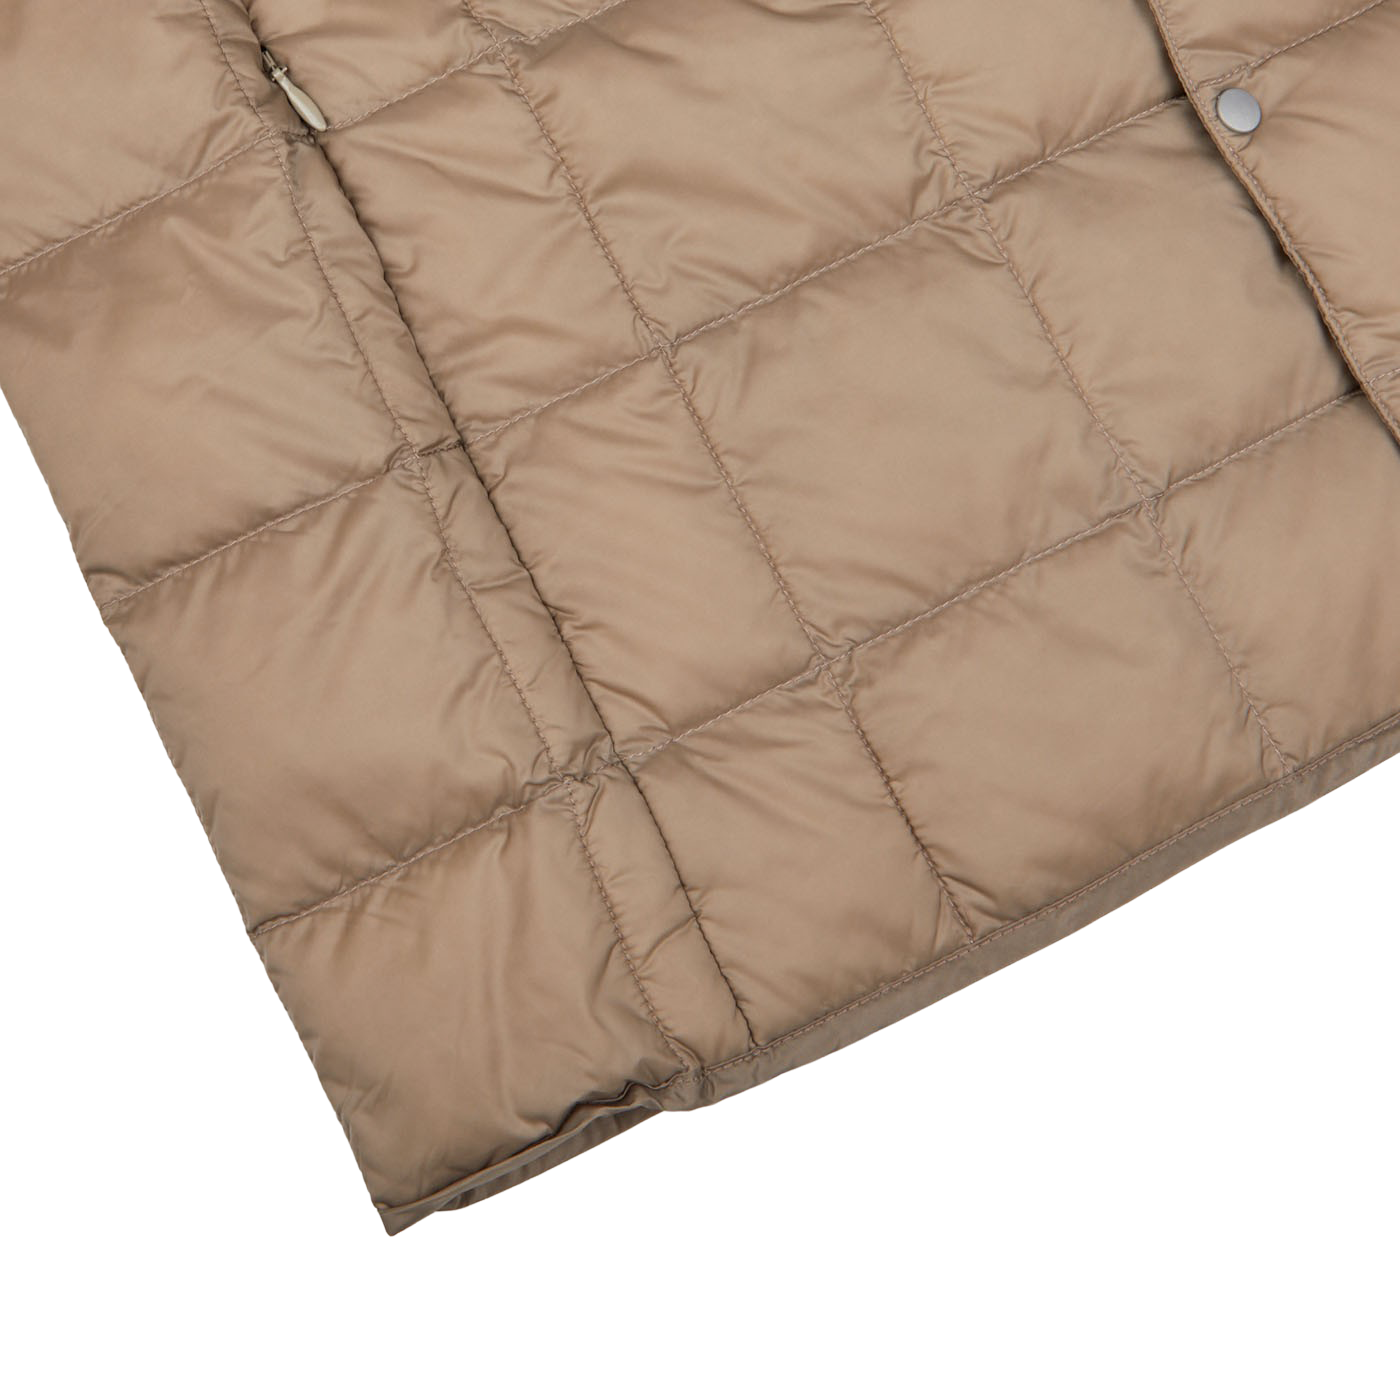 A Taion Khaki Beige Nylon Down Padded Vest on a white surface.